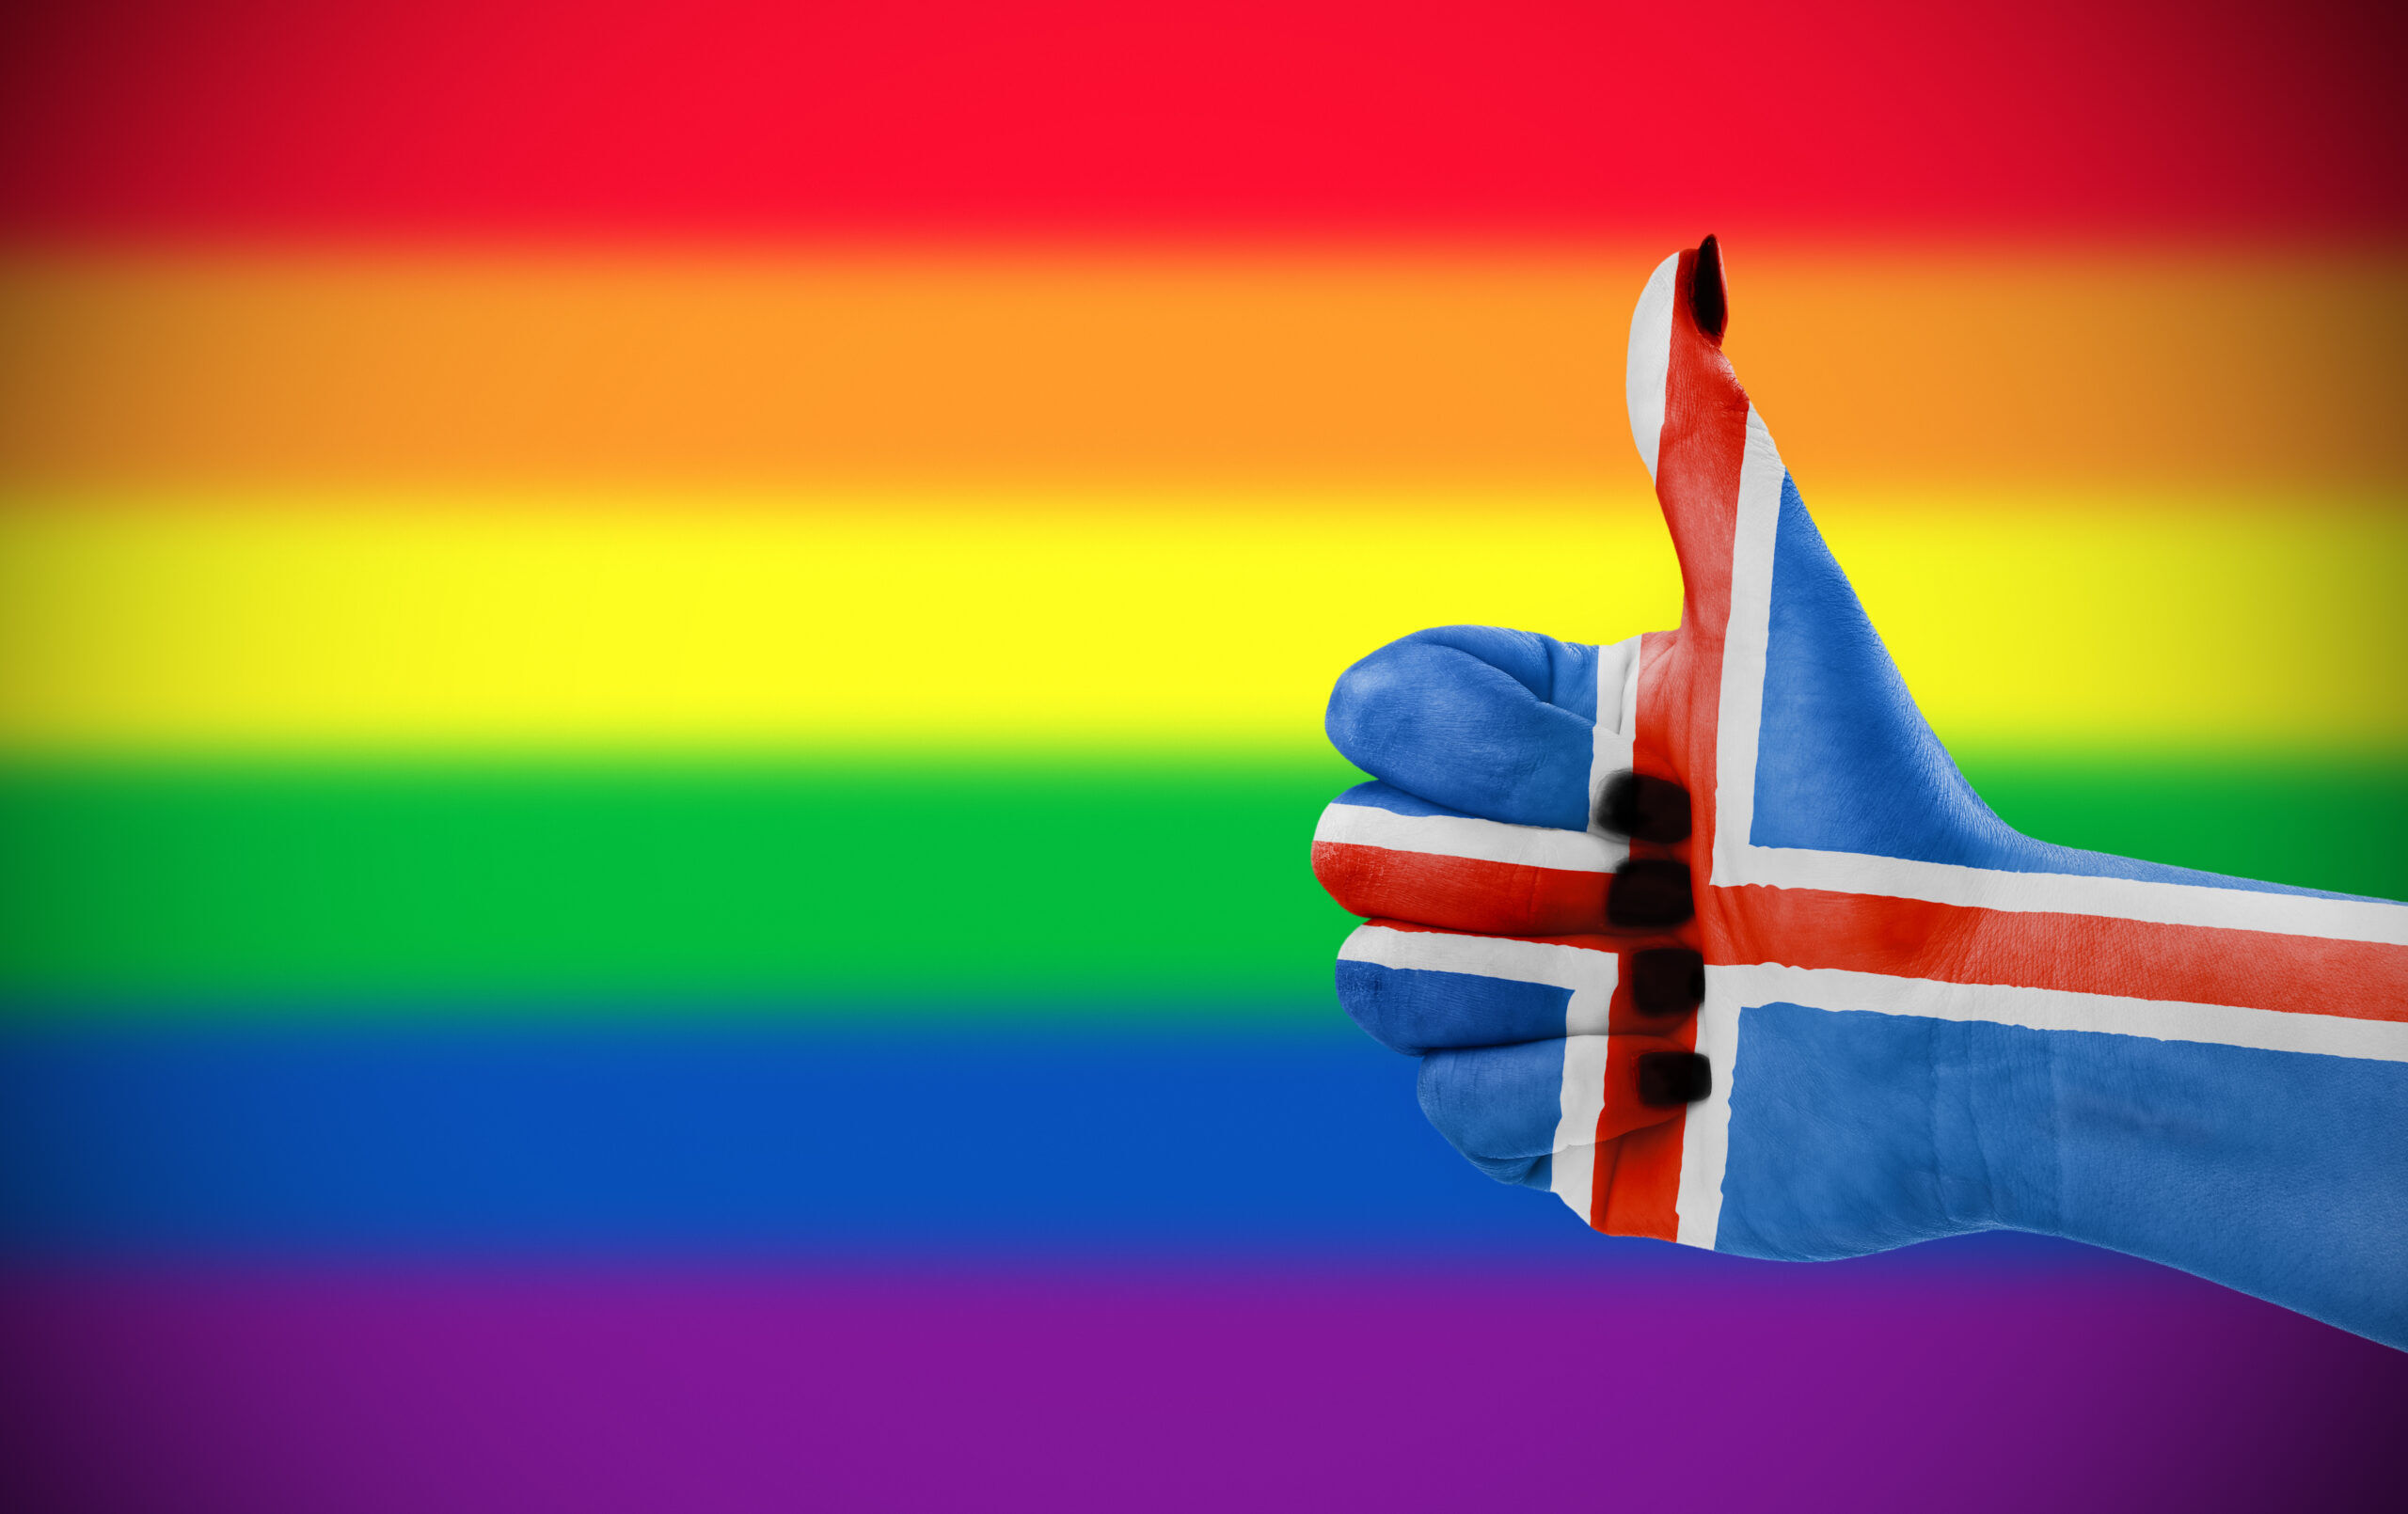 Concept photo - Positive attitude of Iceland for LGBT community. Hand with Icelandic flag painted on it giving thumbs up against rainbow flag. Focus set on hand.